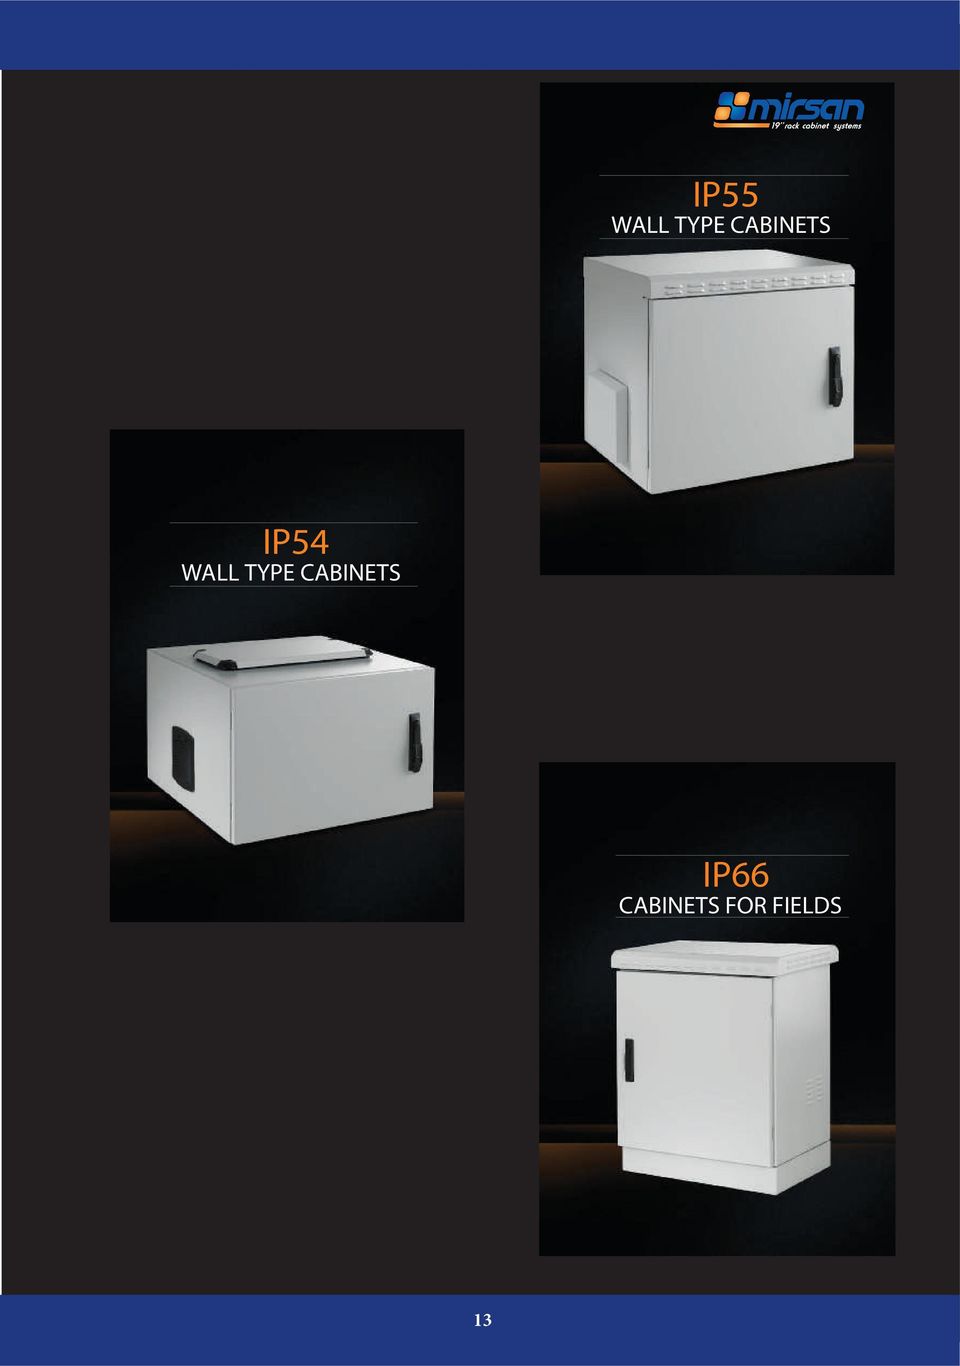 TYPE CABINETS IP66